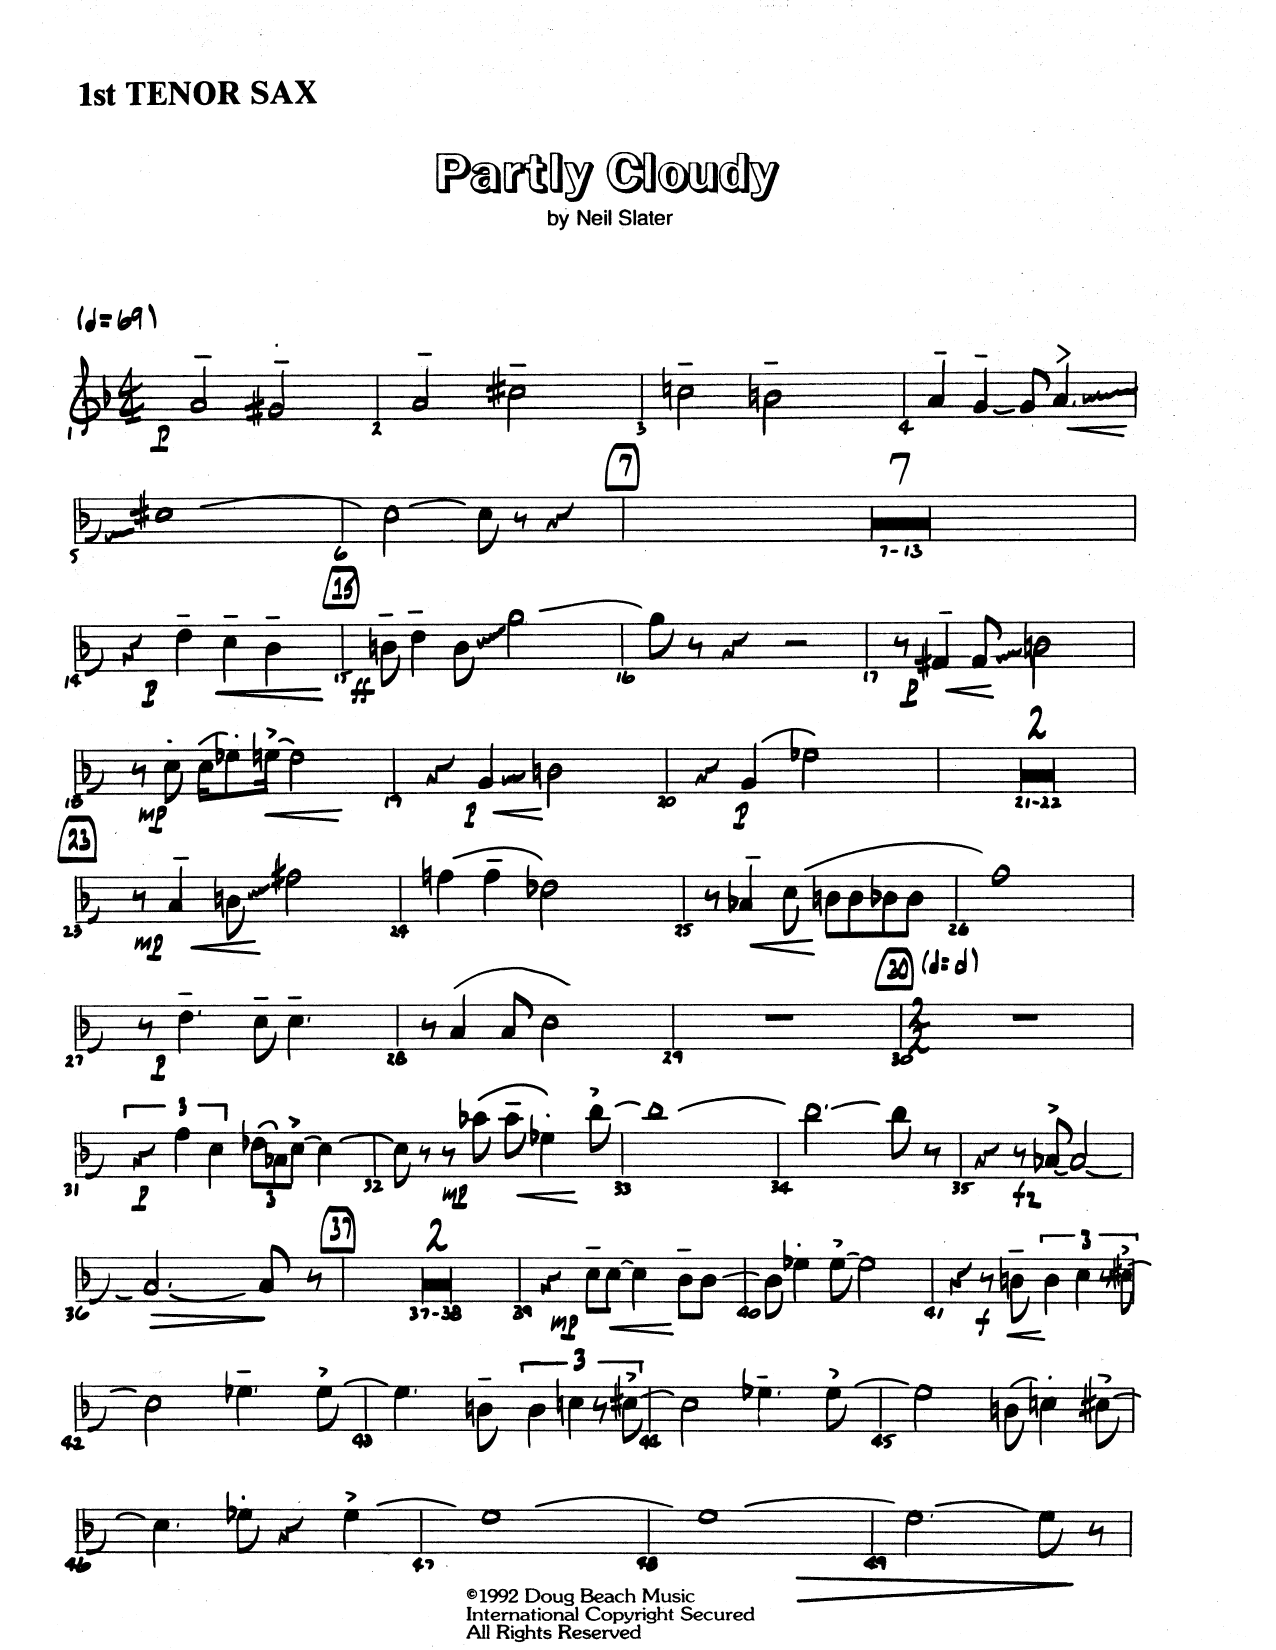 Download Neil Slater Partly Cloudy - 1st Tenor Saxophone Sheet Music